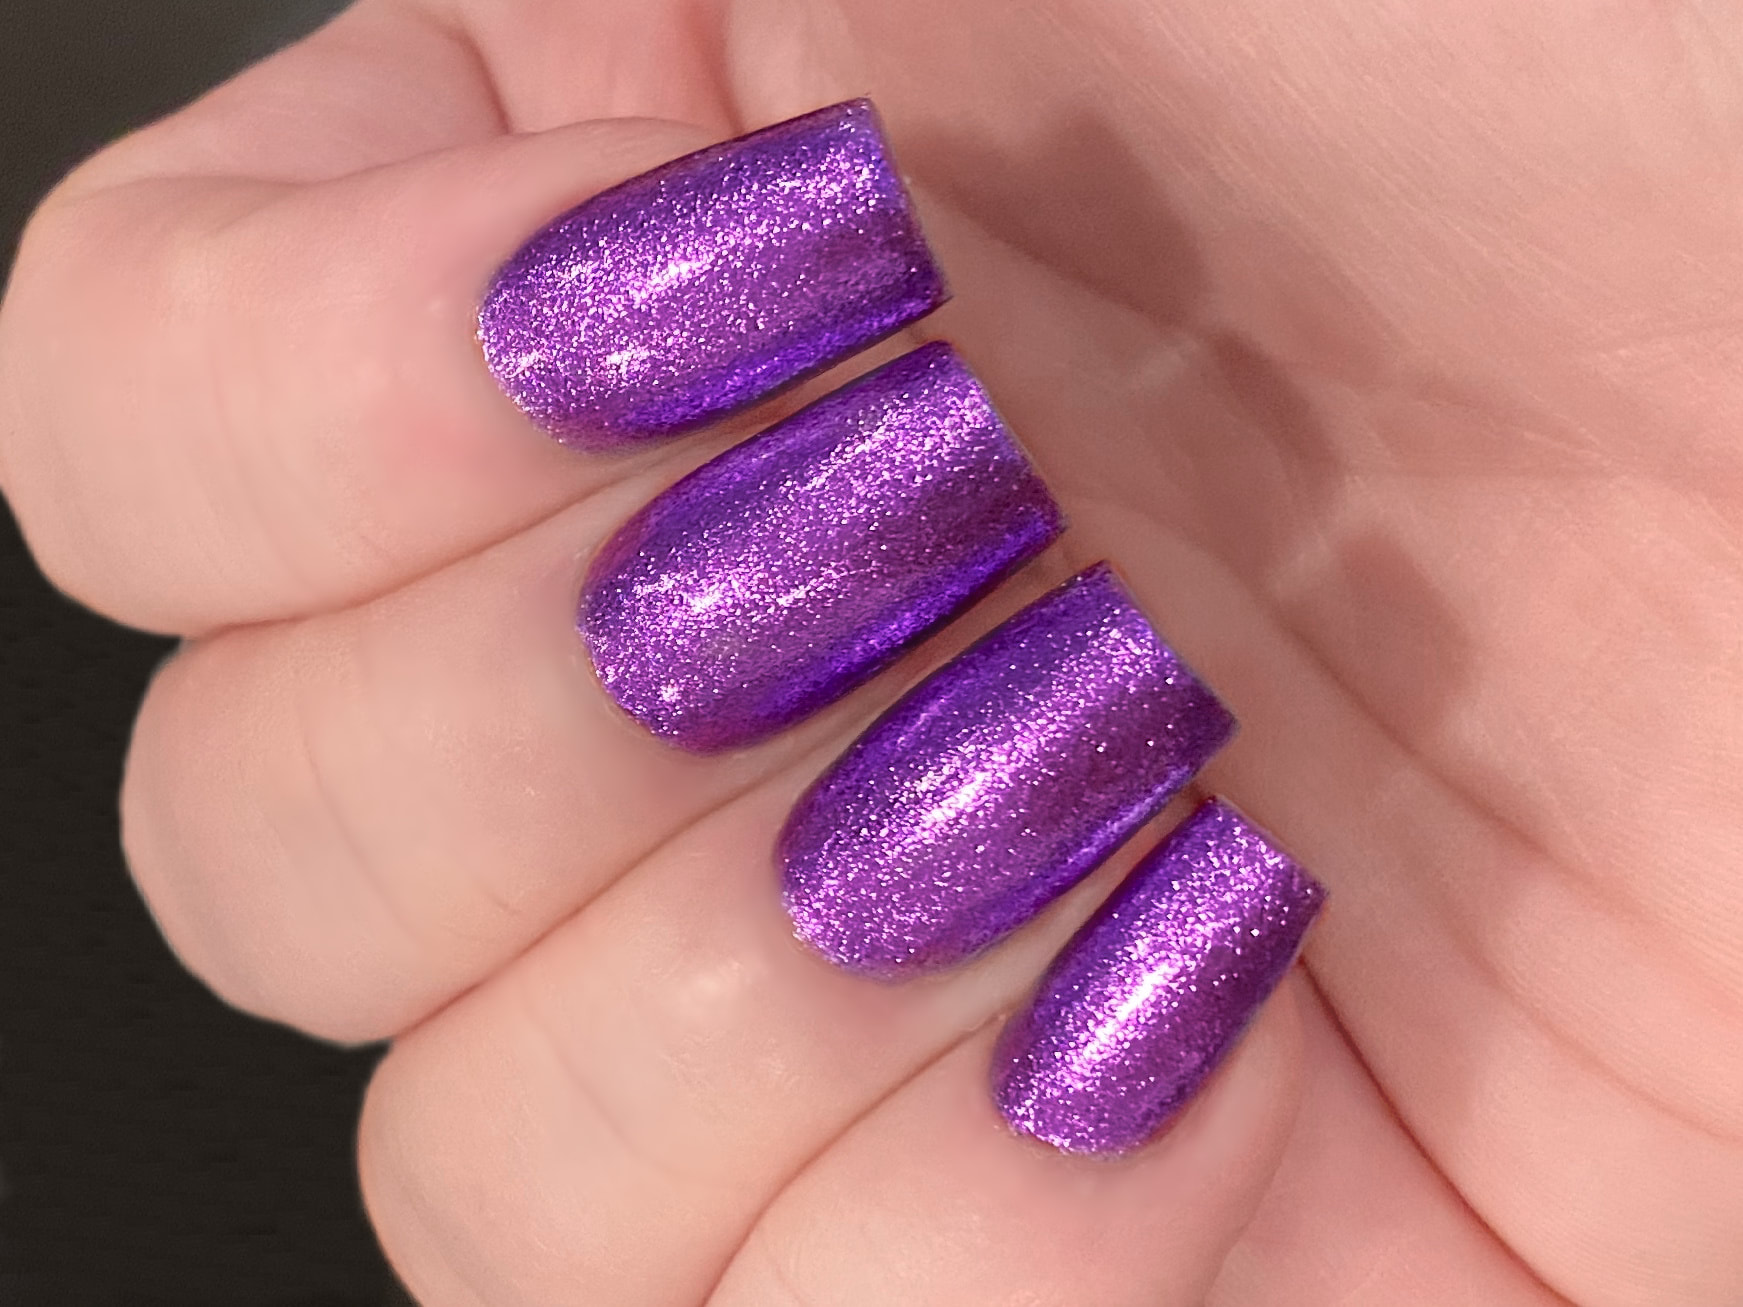 9. "Color Changing Nail Polish" - wide 4